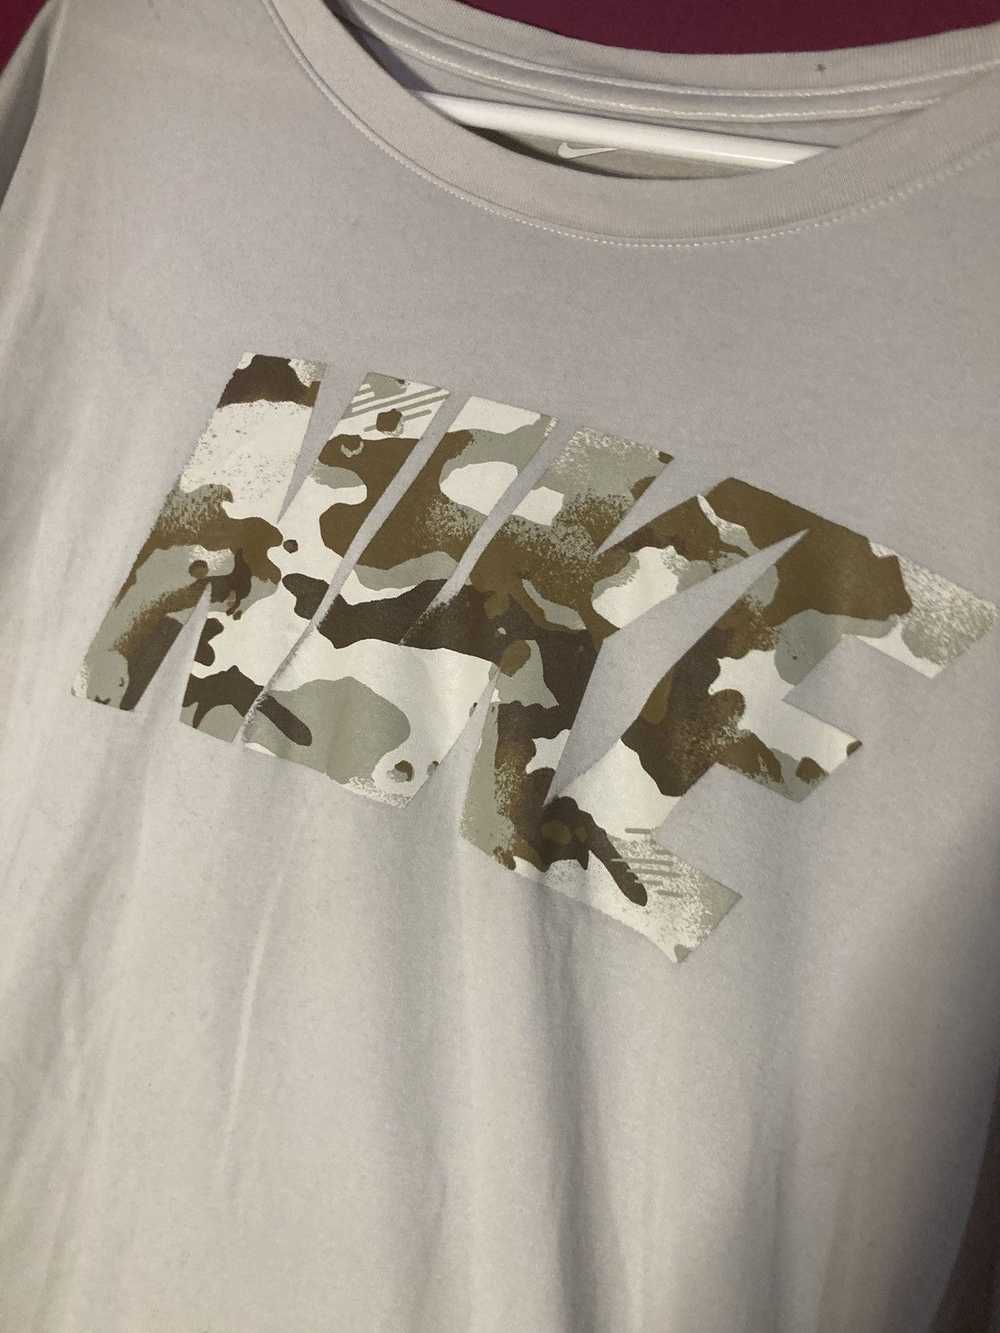 Nike × Other × Streetwear Nike dry fit camo shirt - image 2